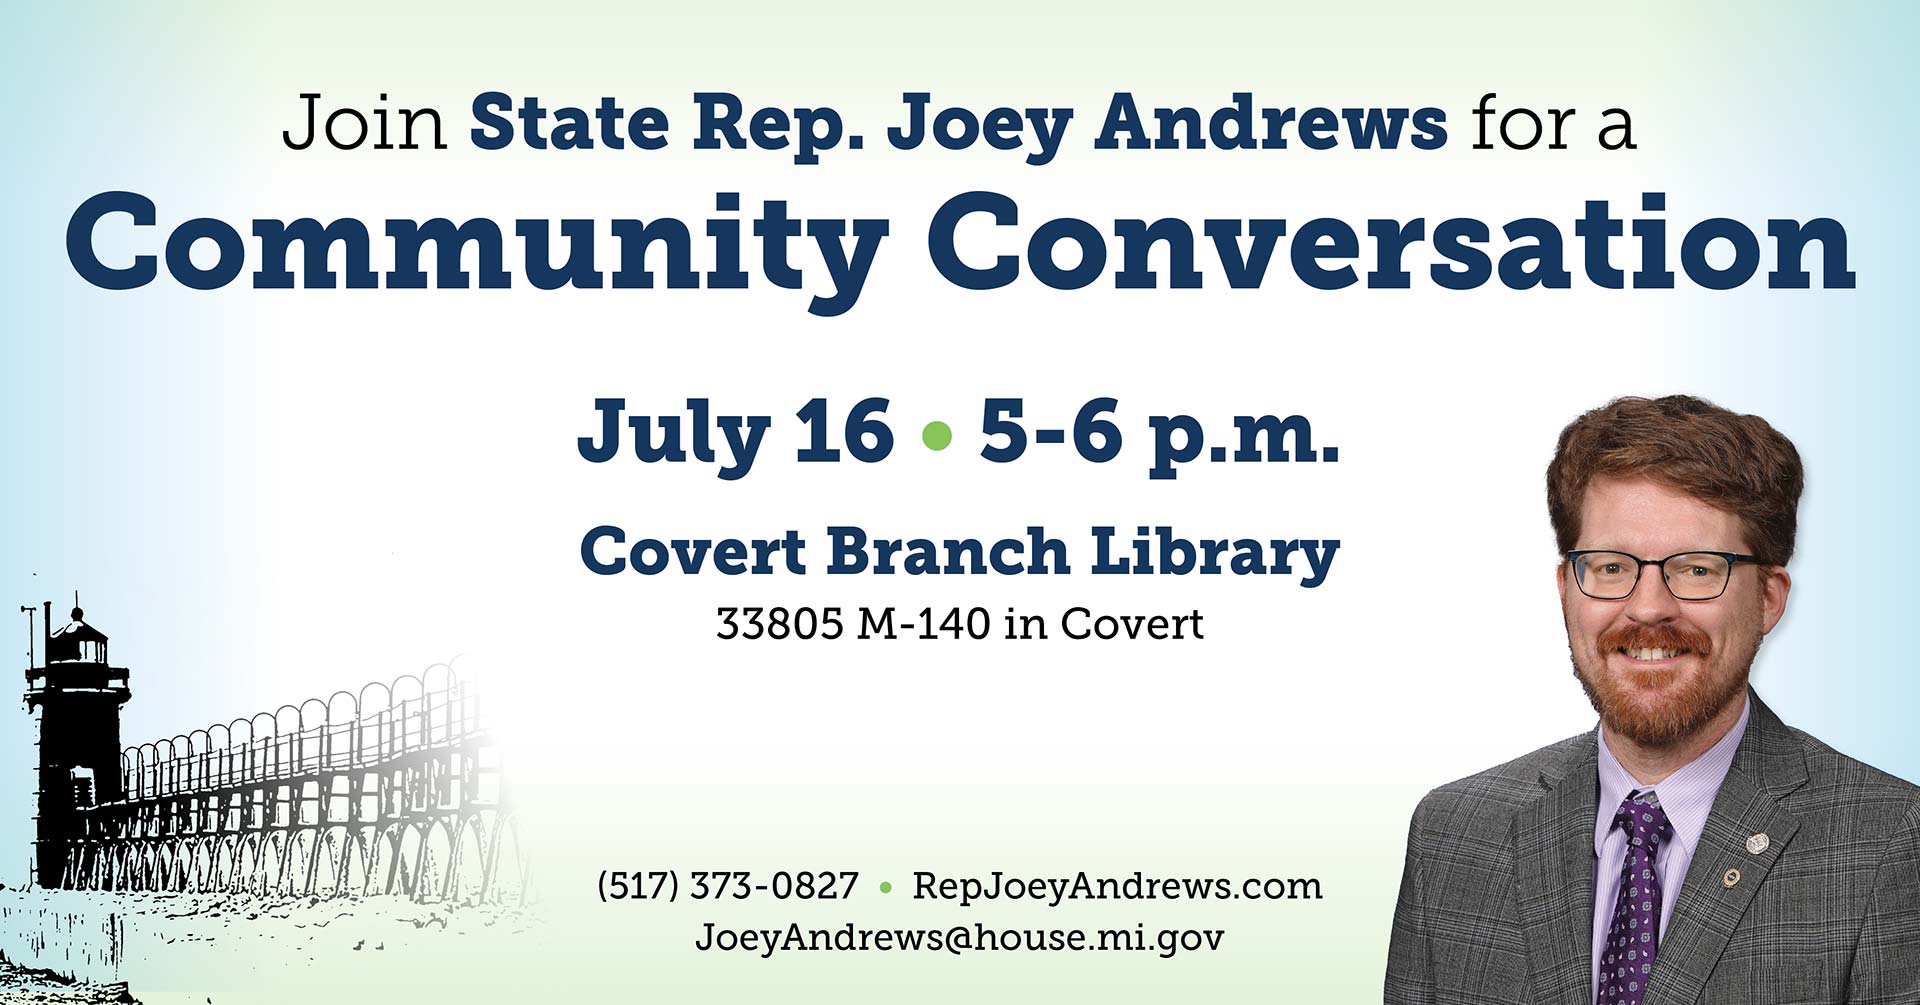 Rep. Andrews Community Conversation image with the following text "Please join us on Tuesday, July 16 from 5-6 PM for a Community Conversation at the Covert Branch Library (33805 M-140, Covert, MI 49043)"